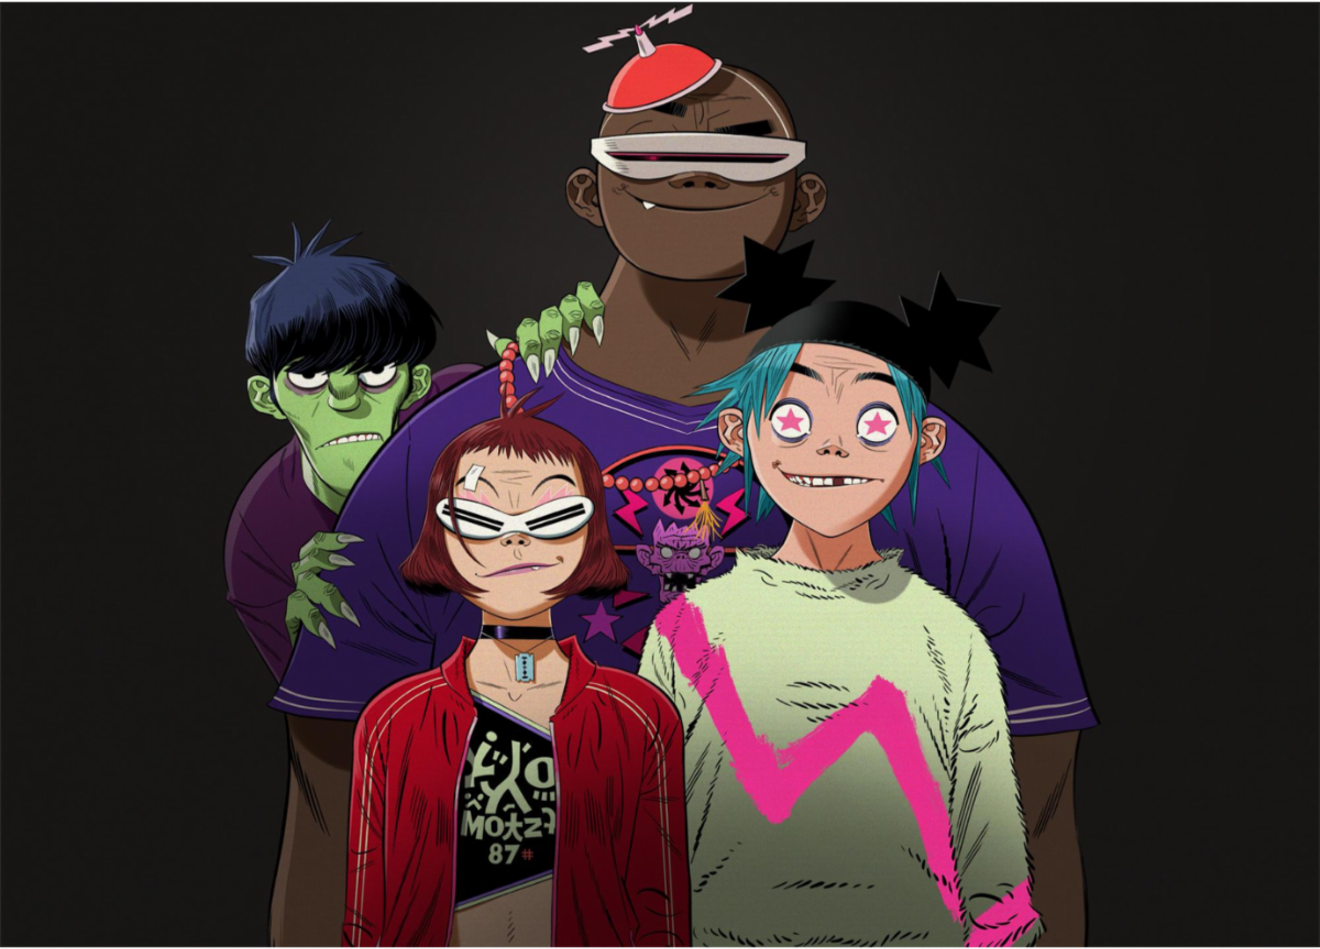 Gorillaz goes on its first North American tour since 2018.